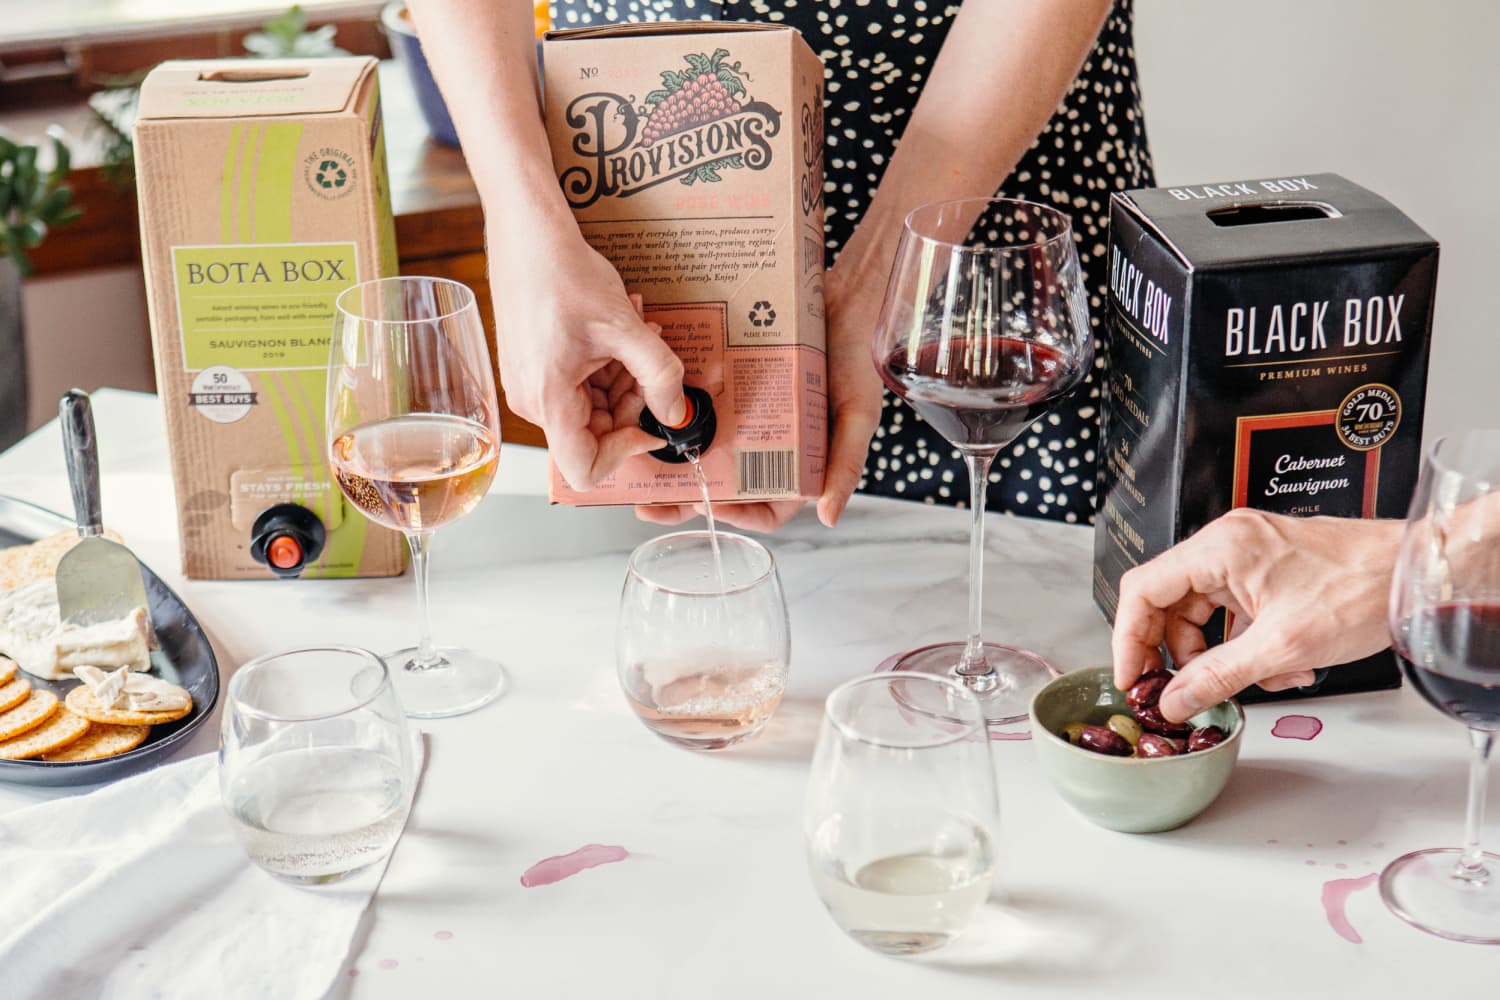 I Tried Every Box of Wine I Could Find — Here’s What I’ll Buy from Now On